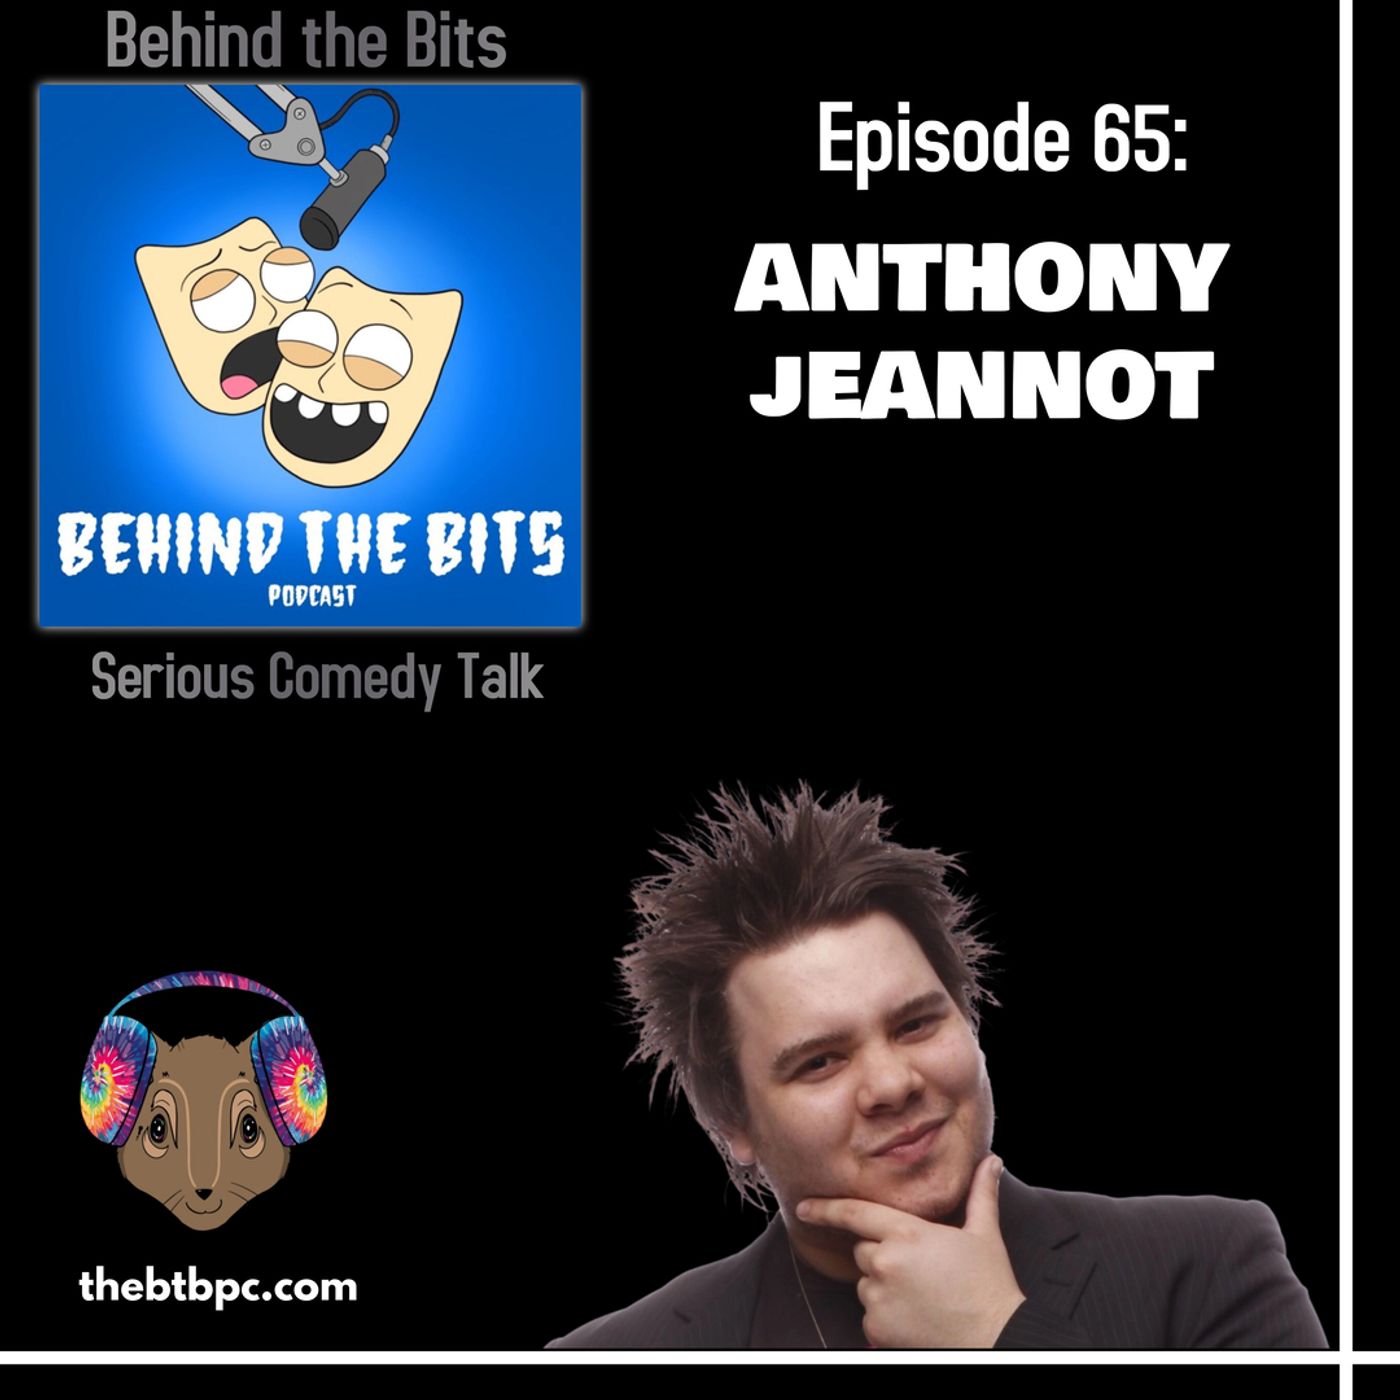 Episode 65: Anthony Jeannot